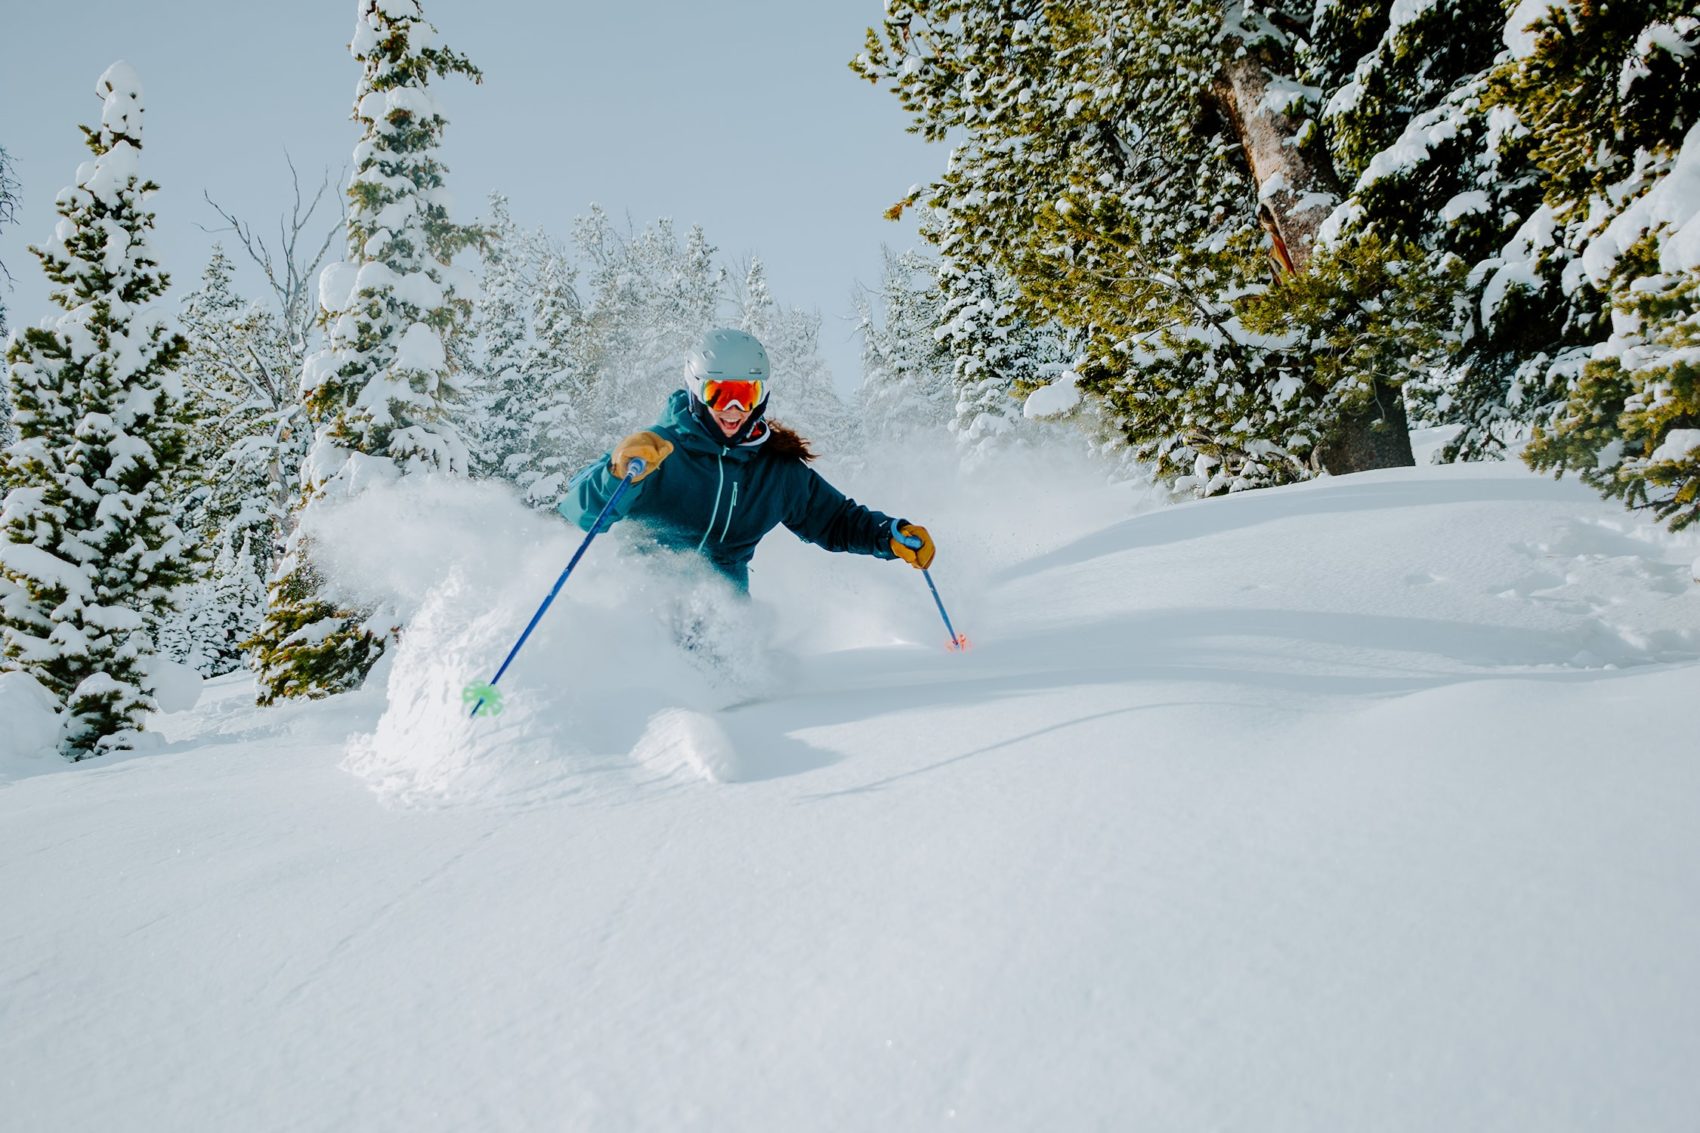 Family Ski Weekends for Under 600? The Indy Pass Costs a Fraction of